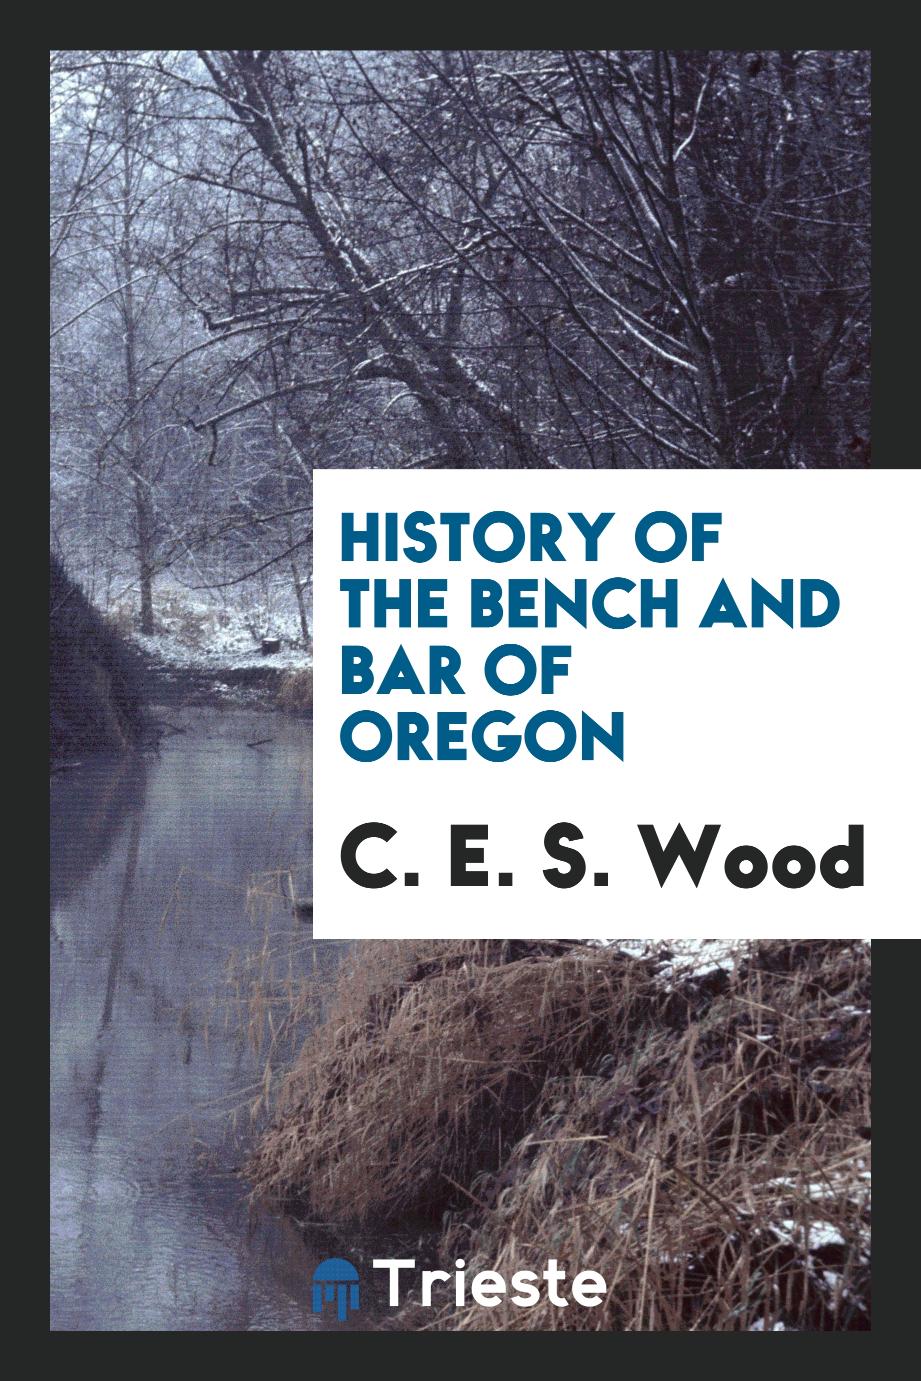 History of the Bench and Bar of Oregon